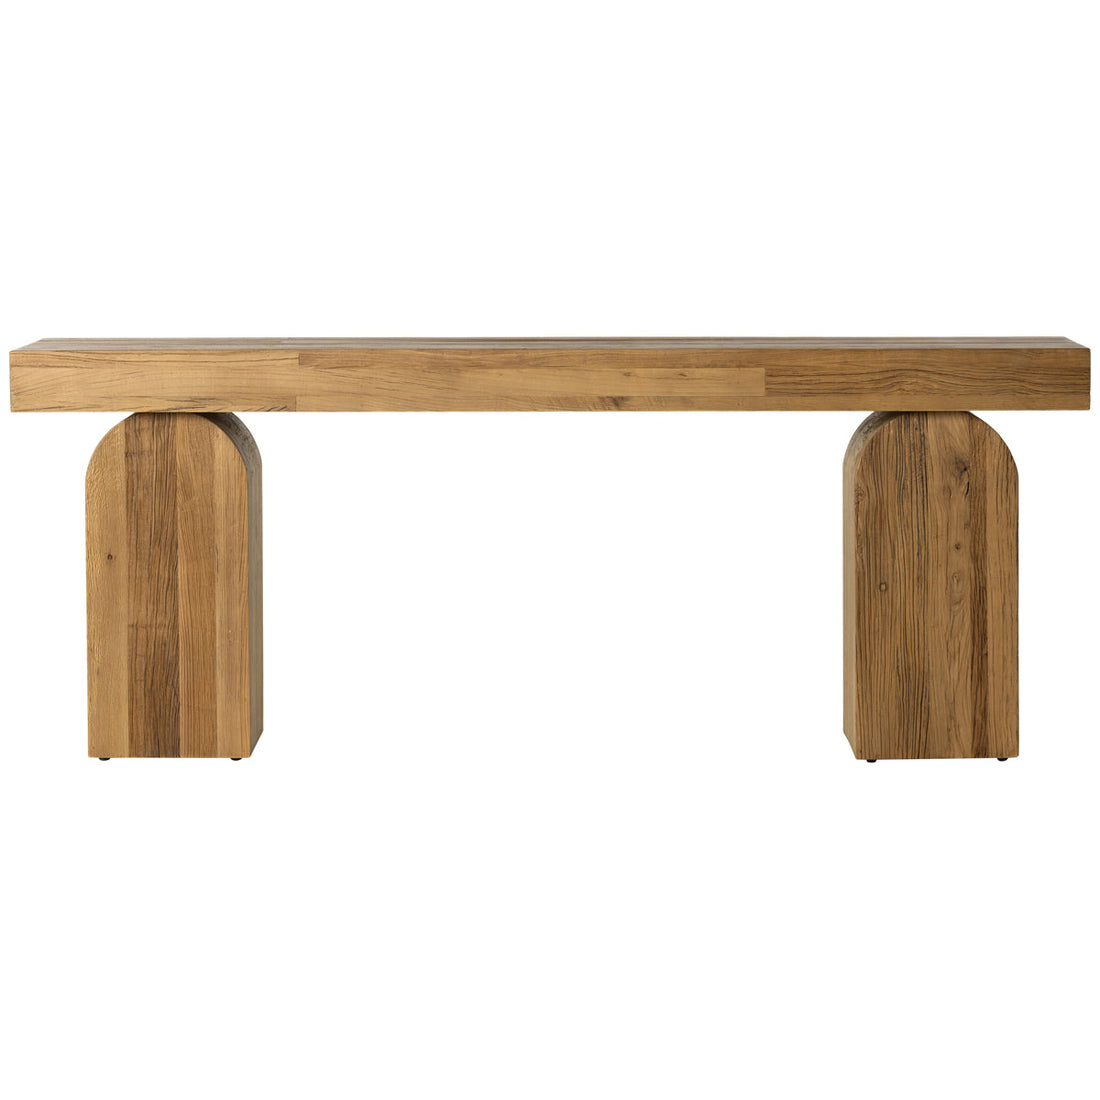 Four Hands Wells Keane Console Table - Natural Elm